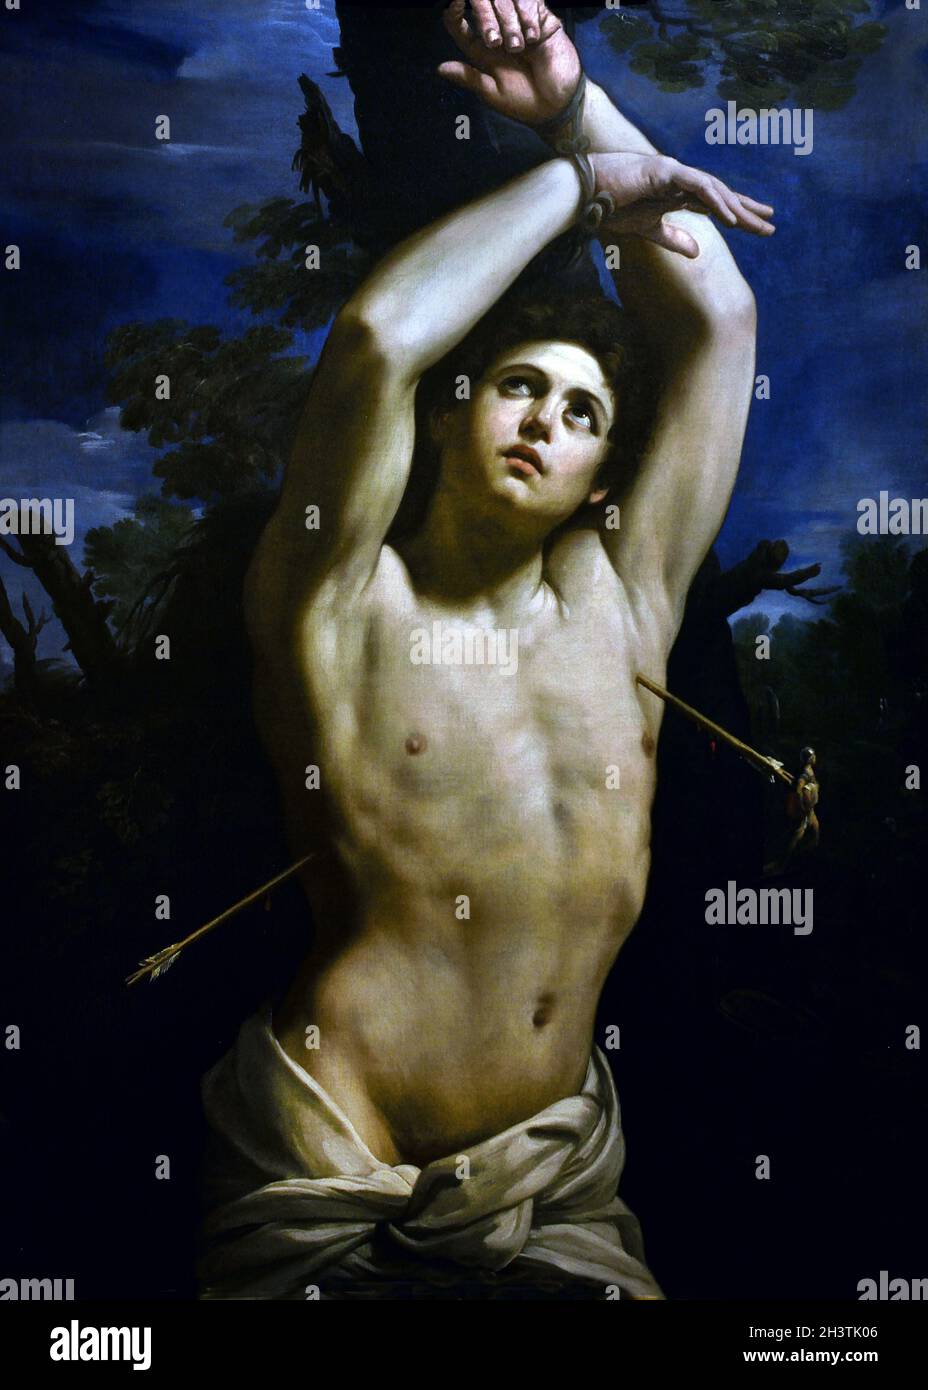 St. Sebastian by Reni Guido (1575-1642)  Italy, Italian, ( Saint Sebastian was an early Christian saint and martyr.  he was killed during the Diocletianic Persecution of Christians. ) Stock Photo